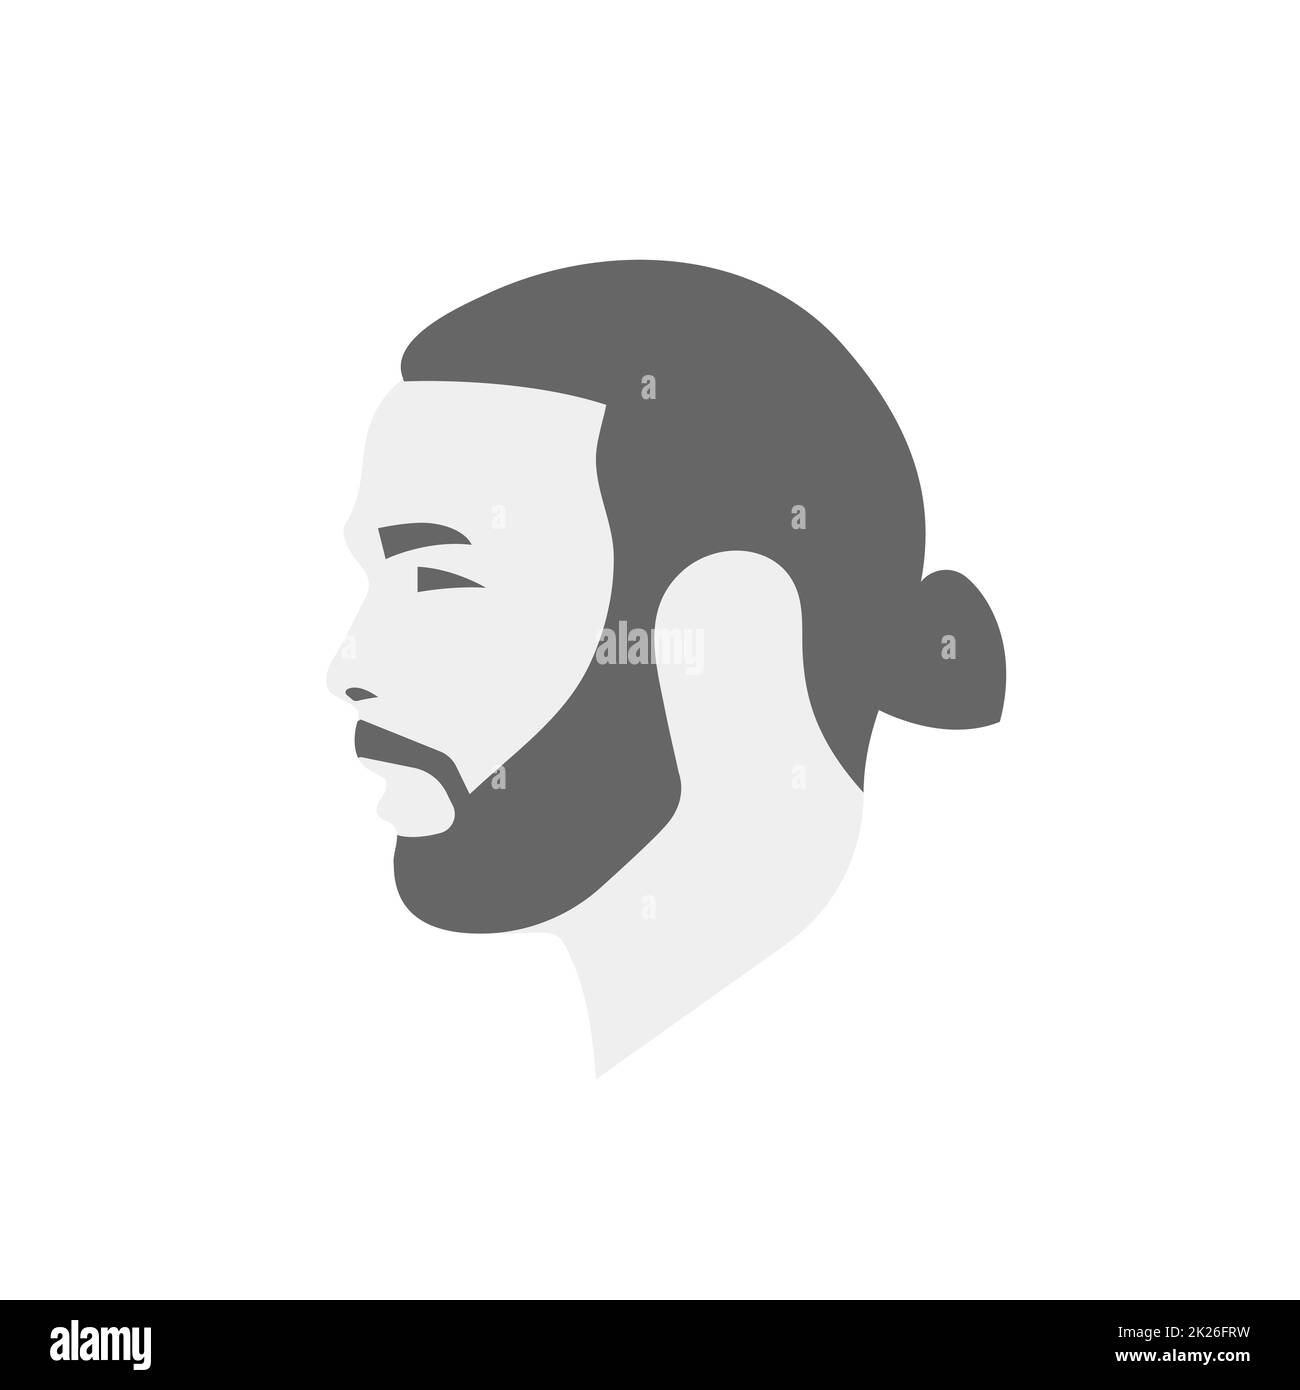 Man profile face icon, hipster freelancer portrait logo. Head hair, bread, and mustache. Minimalistic flat silhouette. Vector illustration. Stock Photo